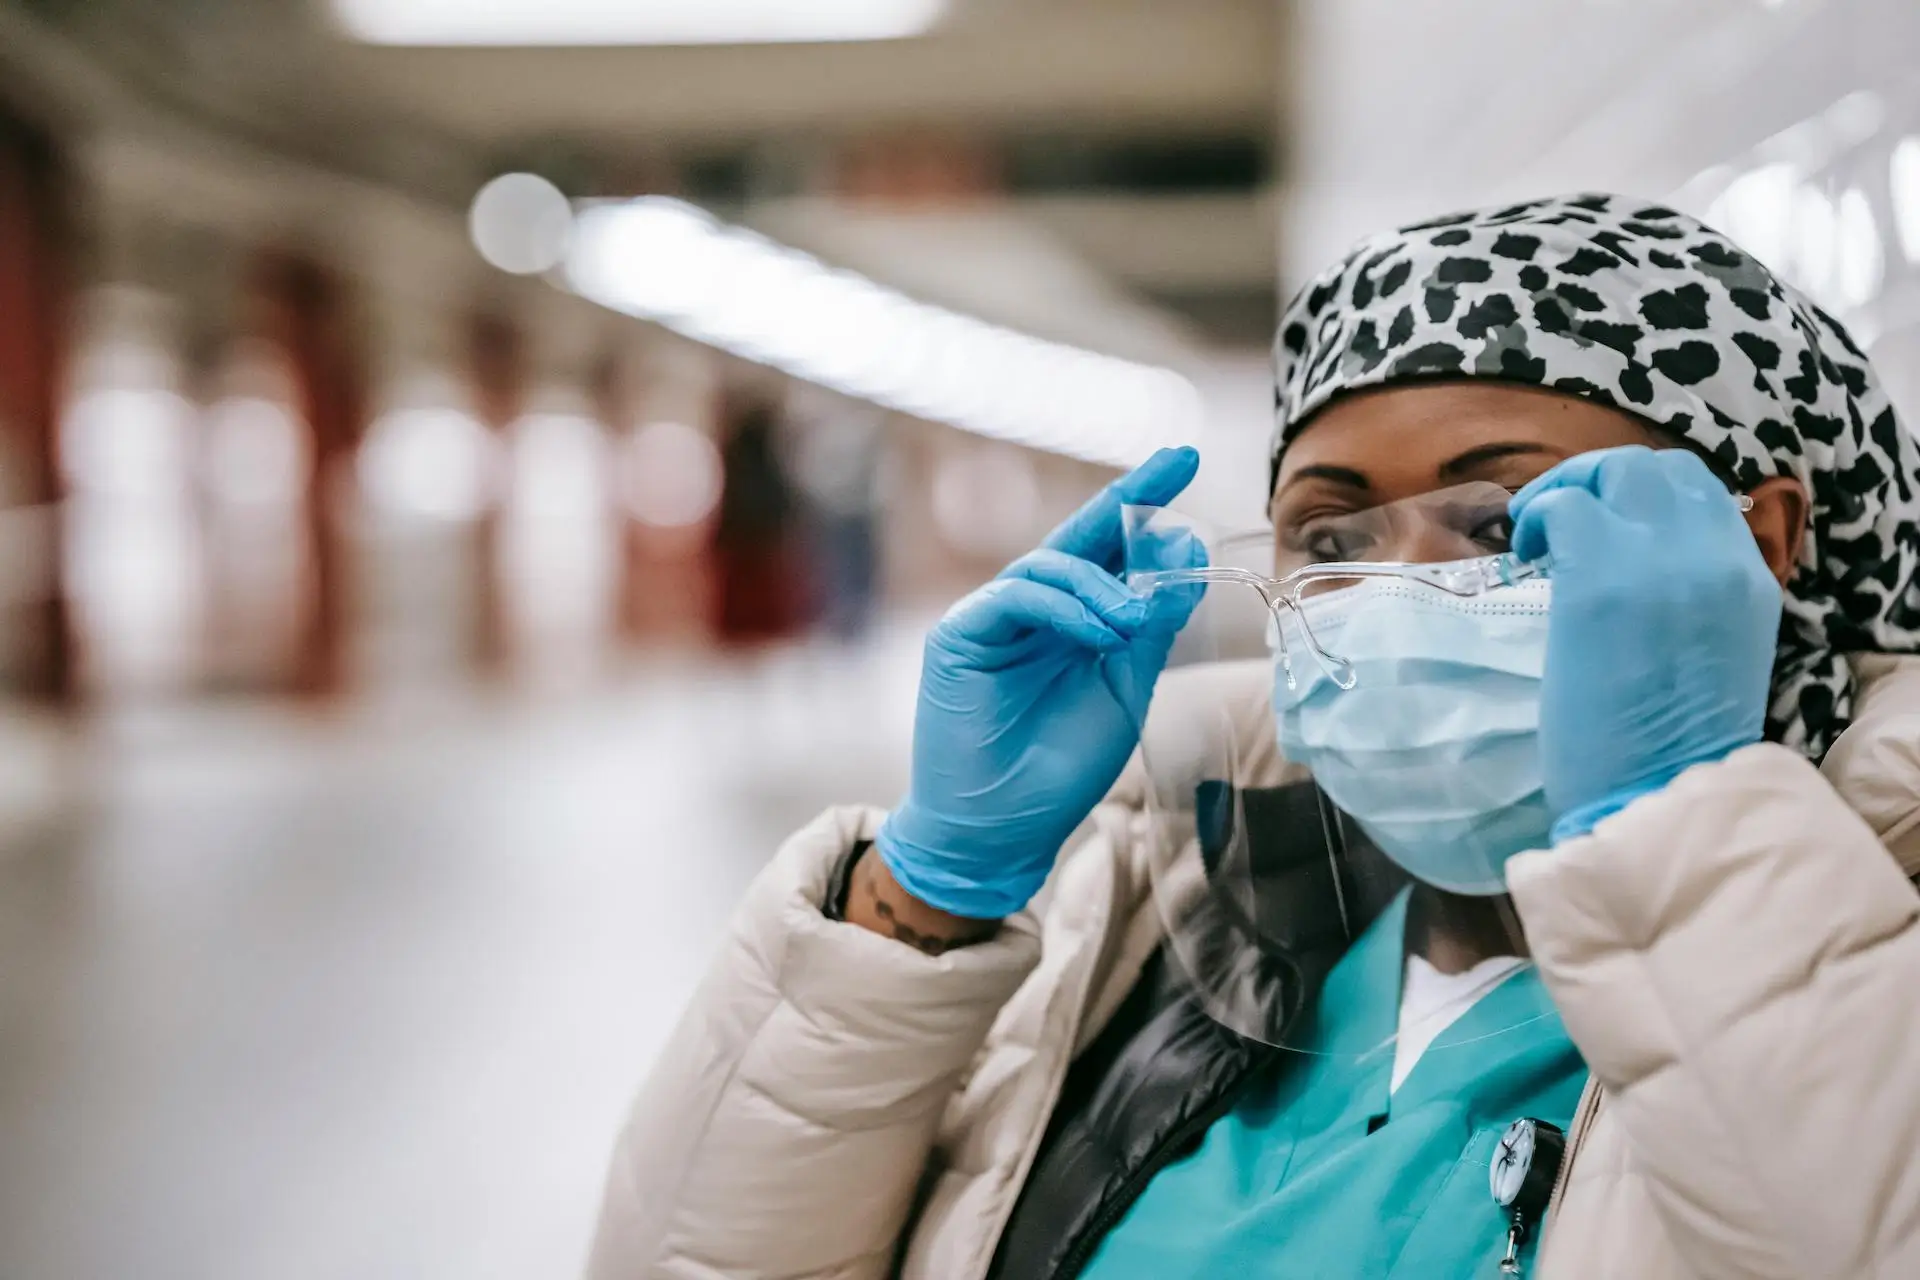 An image of a nurse wearing PPE